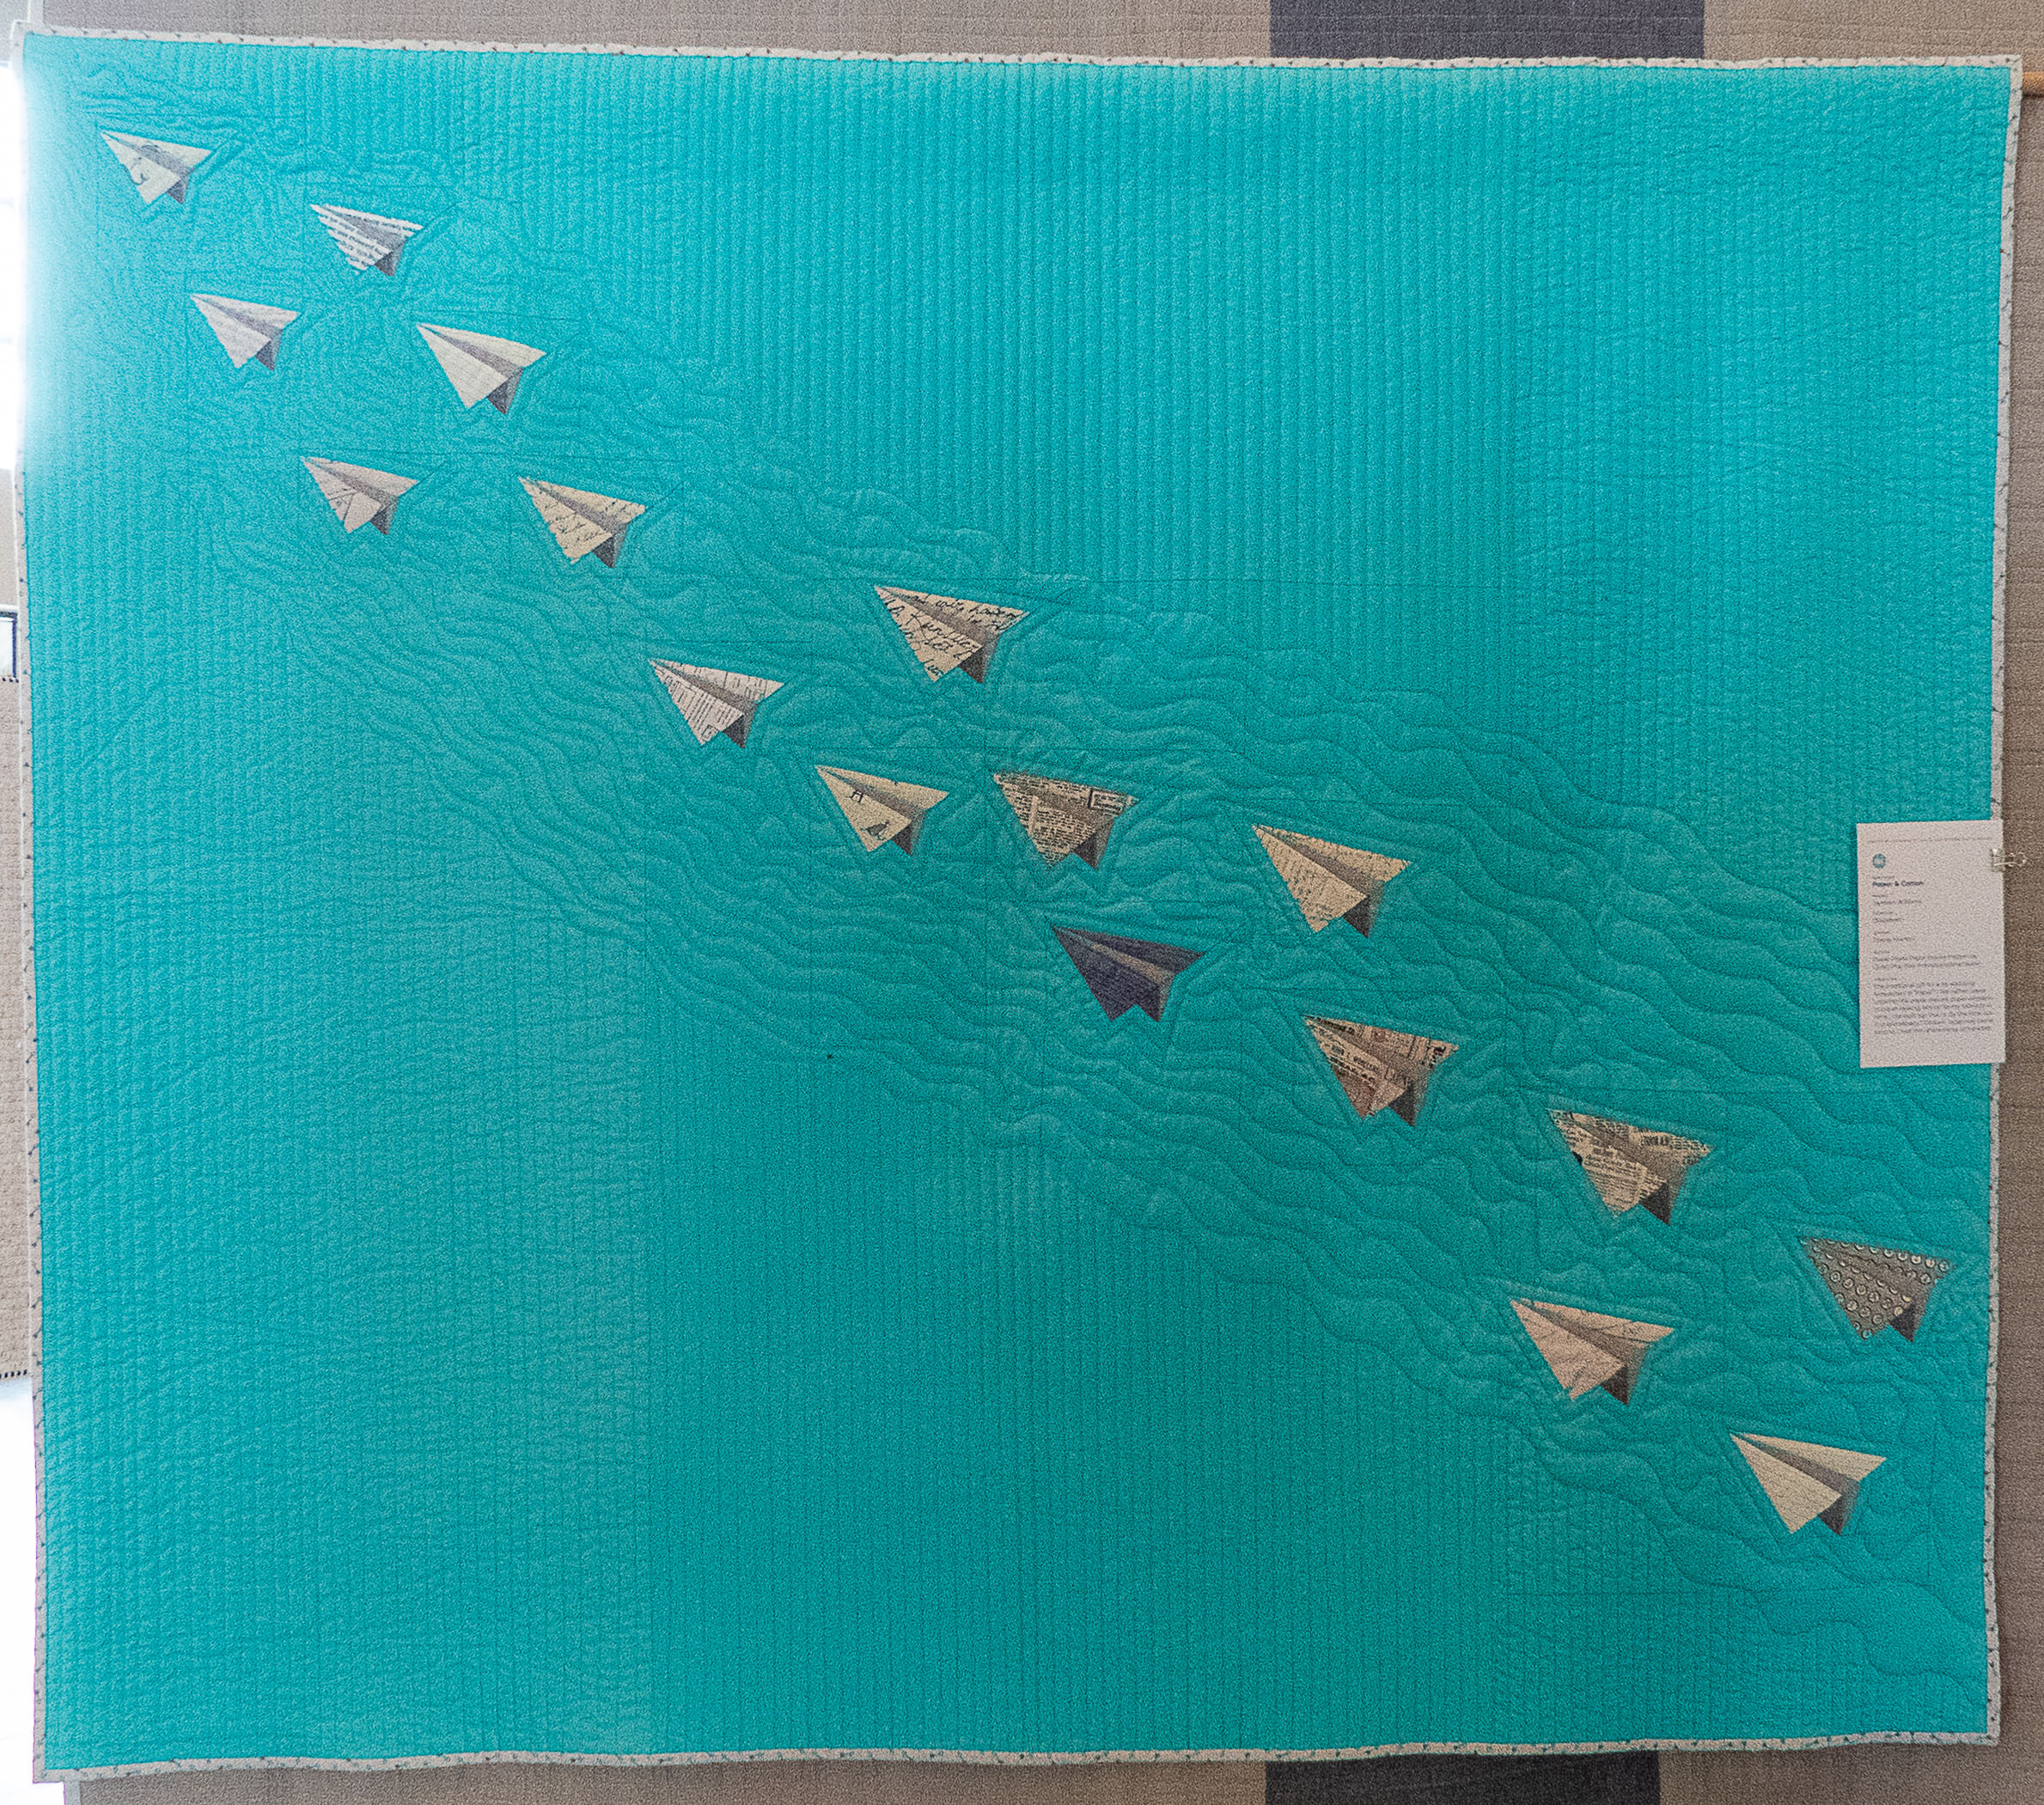 modern quilt containing paper airplane shapes